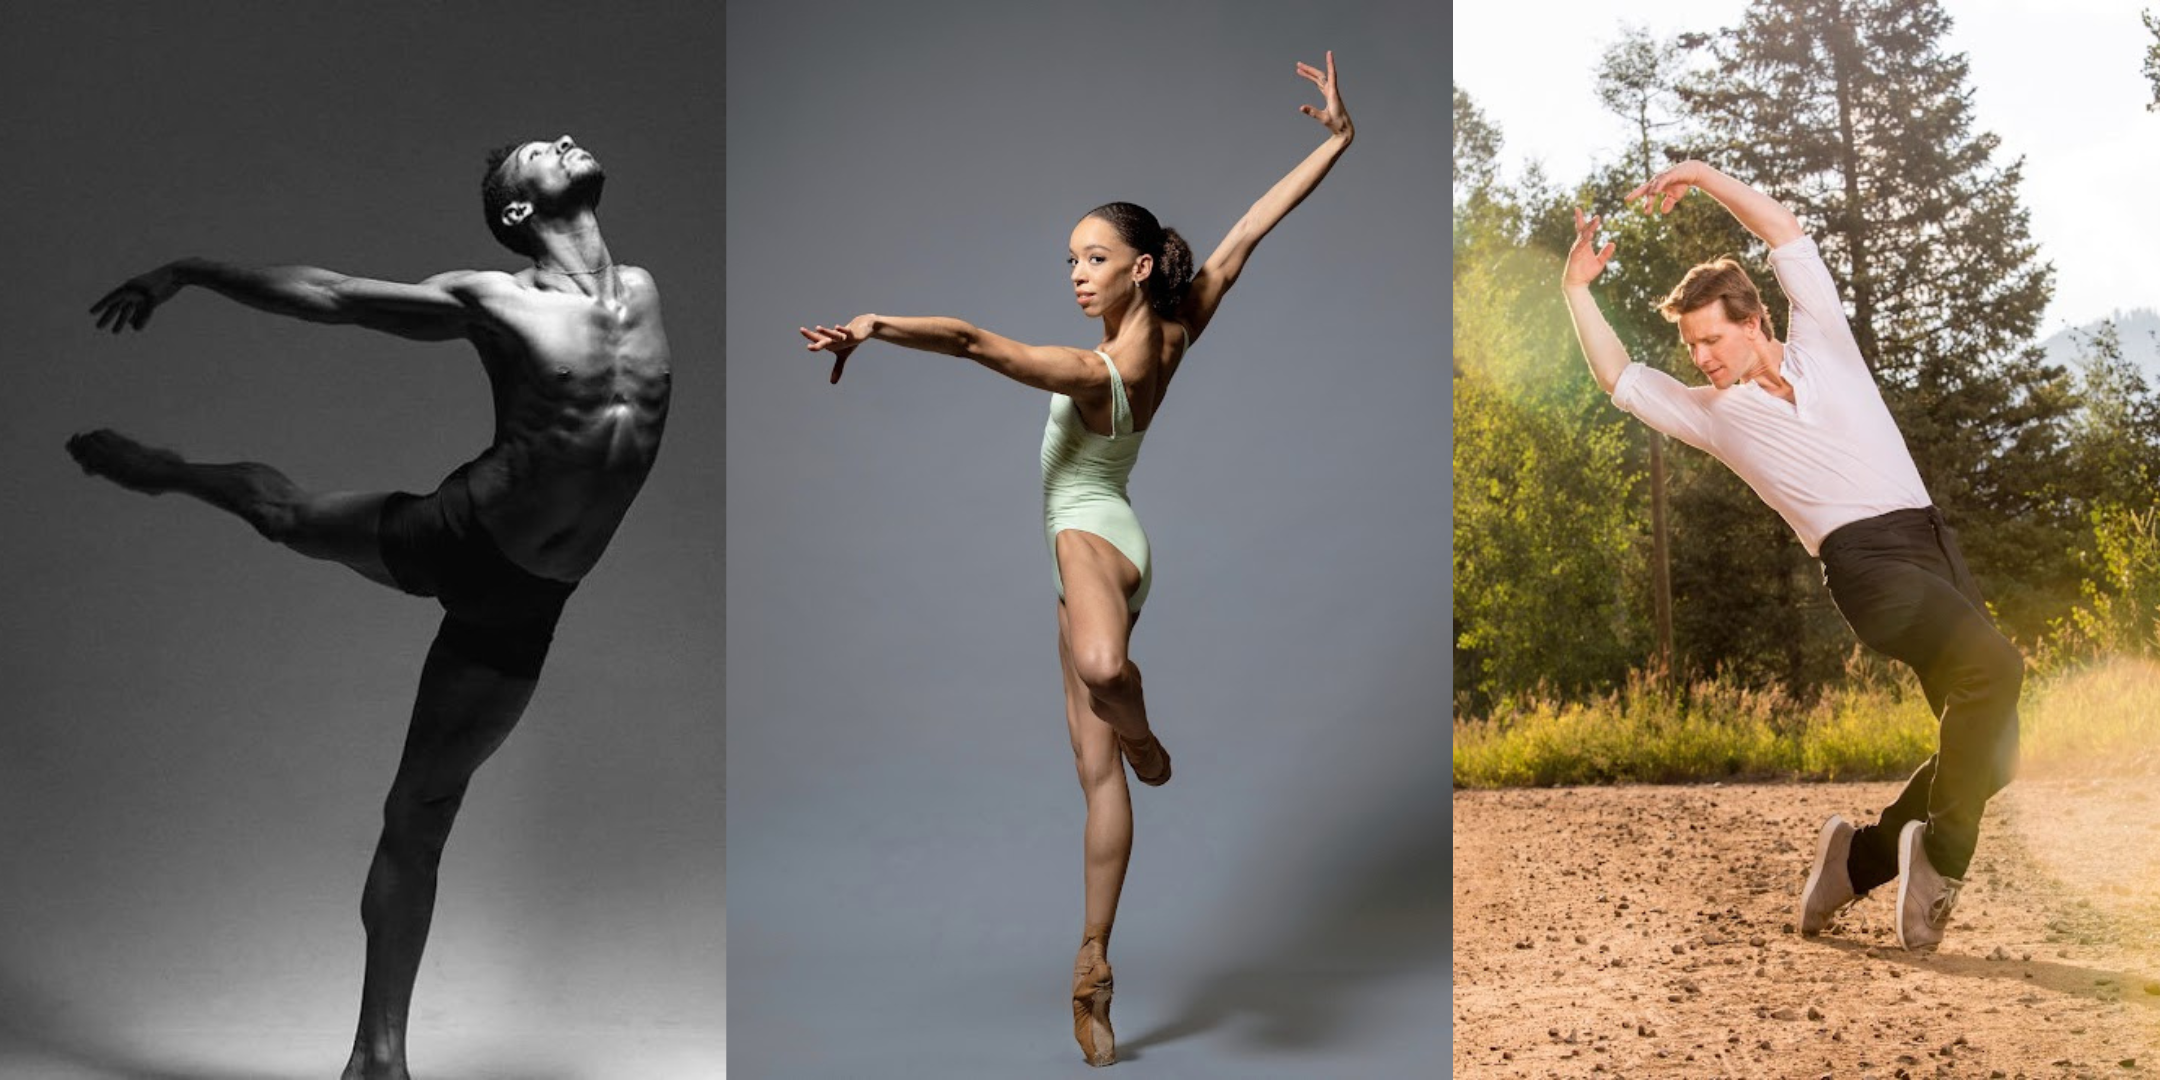 This collage shows three photos side by side. On the far left, a black and white photo shows a male dancer wearing shorts in arabesque, pressing his arms back and looking up towards the ceiling. In the middle photo, a ballerina wearing a mint leotard is shown in profile facing stage right in a turned out passé on pointe. She sweeps her left arm across in front of her and raises her right arm high and slightly behind her as she looks out towards the camera. In the photo on the far right, a male dancer in a long-sleeved white t-shirt, black jeans and sneakers dances outside in front of a line of trees. He pushes up onto the tips of his toes with bent knees and holds his arms in high fifth position, looking down over his right shoulder.